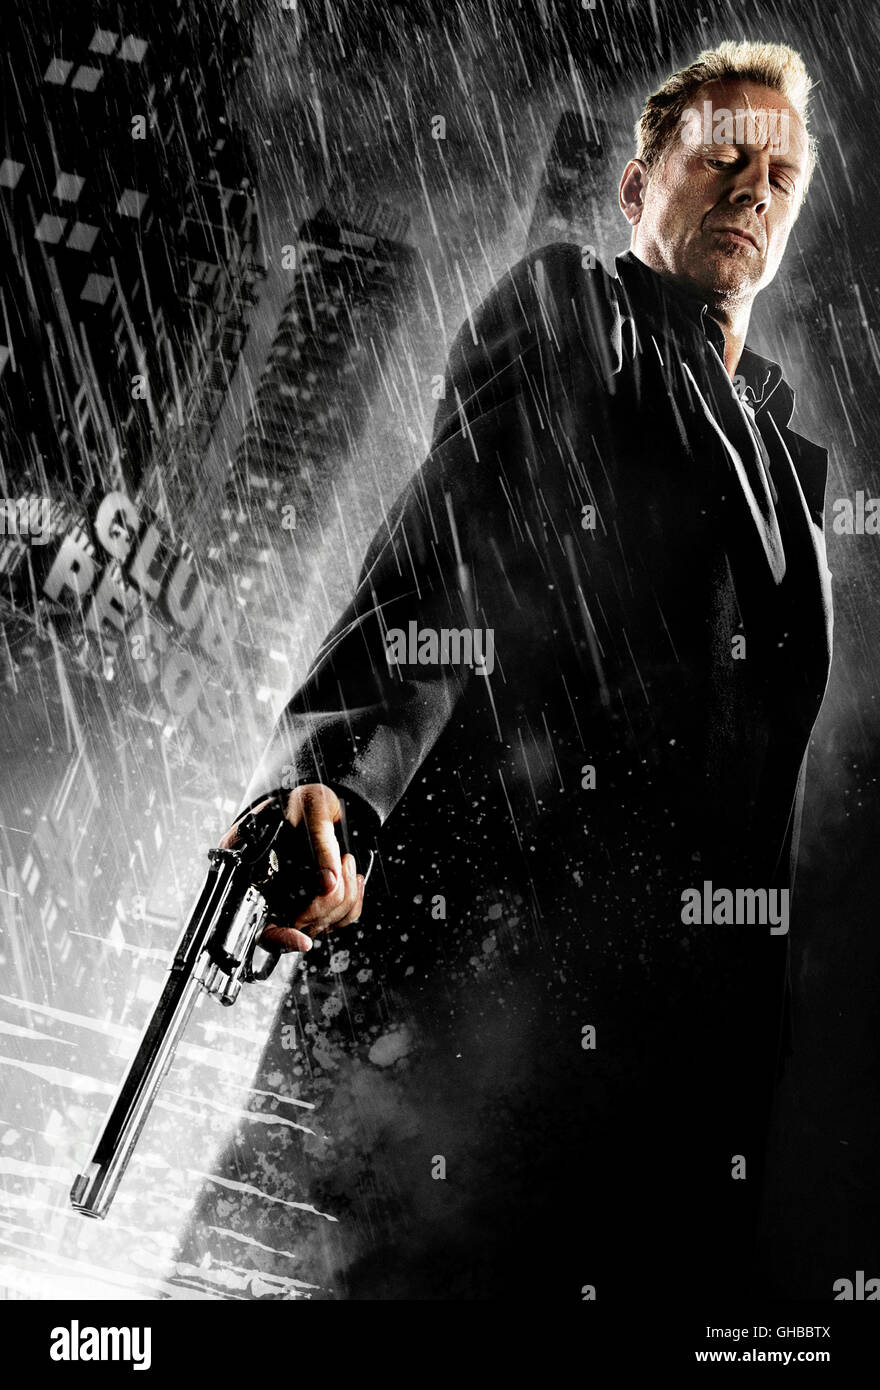 SIN CITY USA 2005 Robert Rodriguez Hartigan (BRUCE WILLIS) Distributed by Buena Vista International. THIS MATERIAL MAY BE LAWFULLY USED ALL MEDIA ONLY TO PROMOTE RELEASE OF MOTION PICTURE ENTITLED 'SIN CITY' DURING PICTURE'S PROMOTIONAL WINDOWS. ANY OTHER USE, RE-USE, DUPLICATION OR POSTING OF THIS MATERIAL IS STRICTLY PROHIBITED WITHOUT EXPRESS WRITTEN CONSENT OF MIRAMAX FILMS, COULD RESULT IN LEGAL LIABILITY. YOU WILL BE SOLELY RESPONSIBLE FOR ANY CLAIMS, DAMAGES, FEES, COSTS, PENALTIES ARISING OUT OF UNAUTHORIZED USE OF THIS MATERIAL BY YOU OR YOUR AGENTS. Regie: Robert Rodriguez Stock Photo